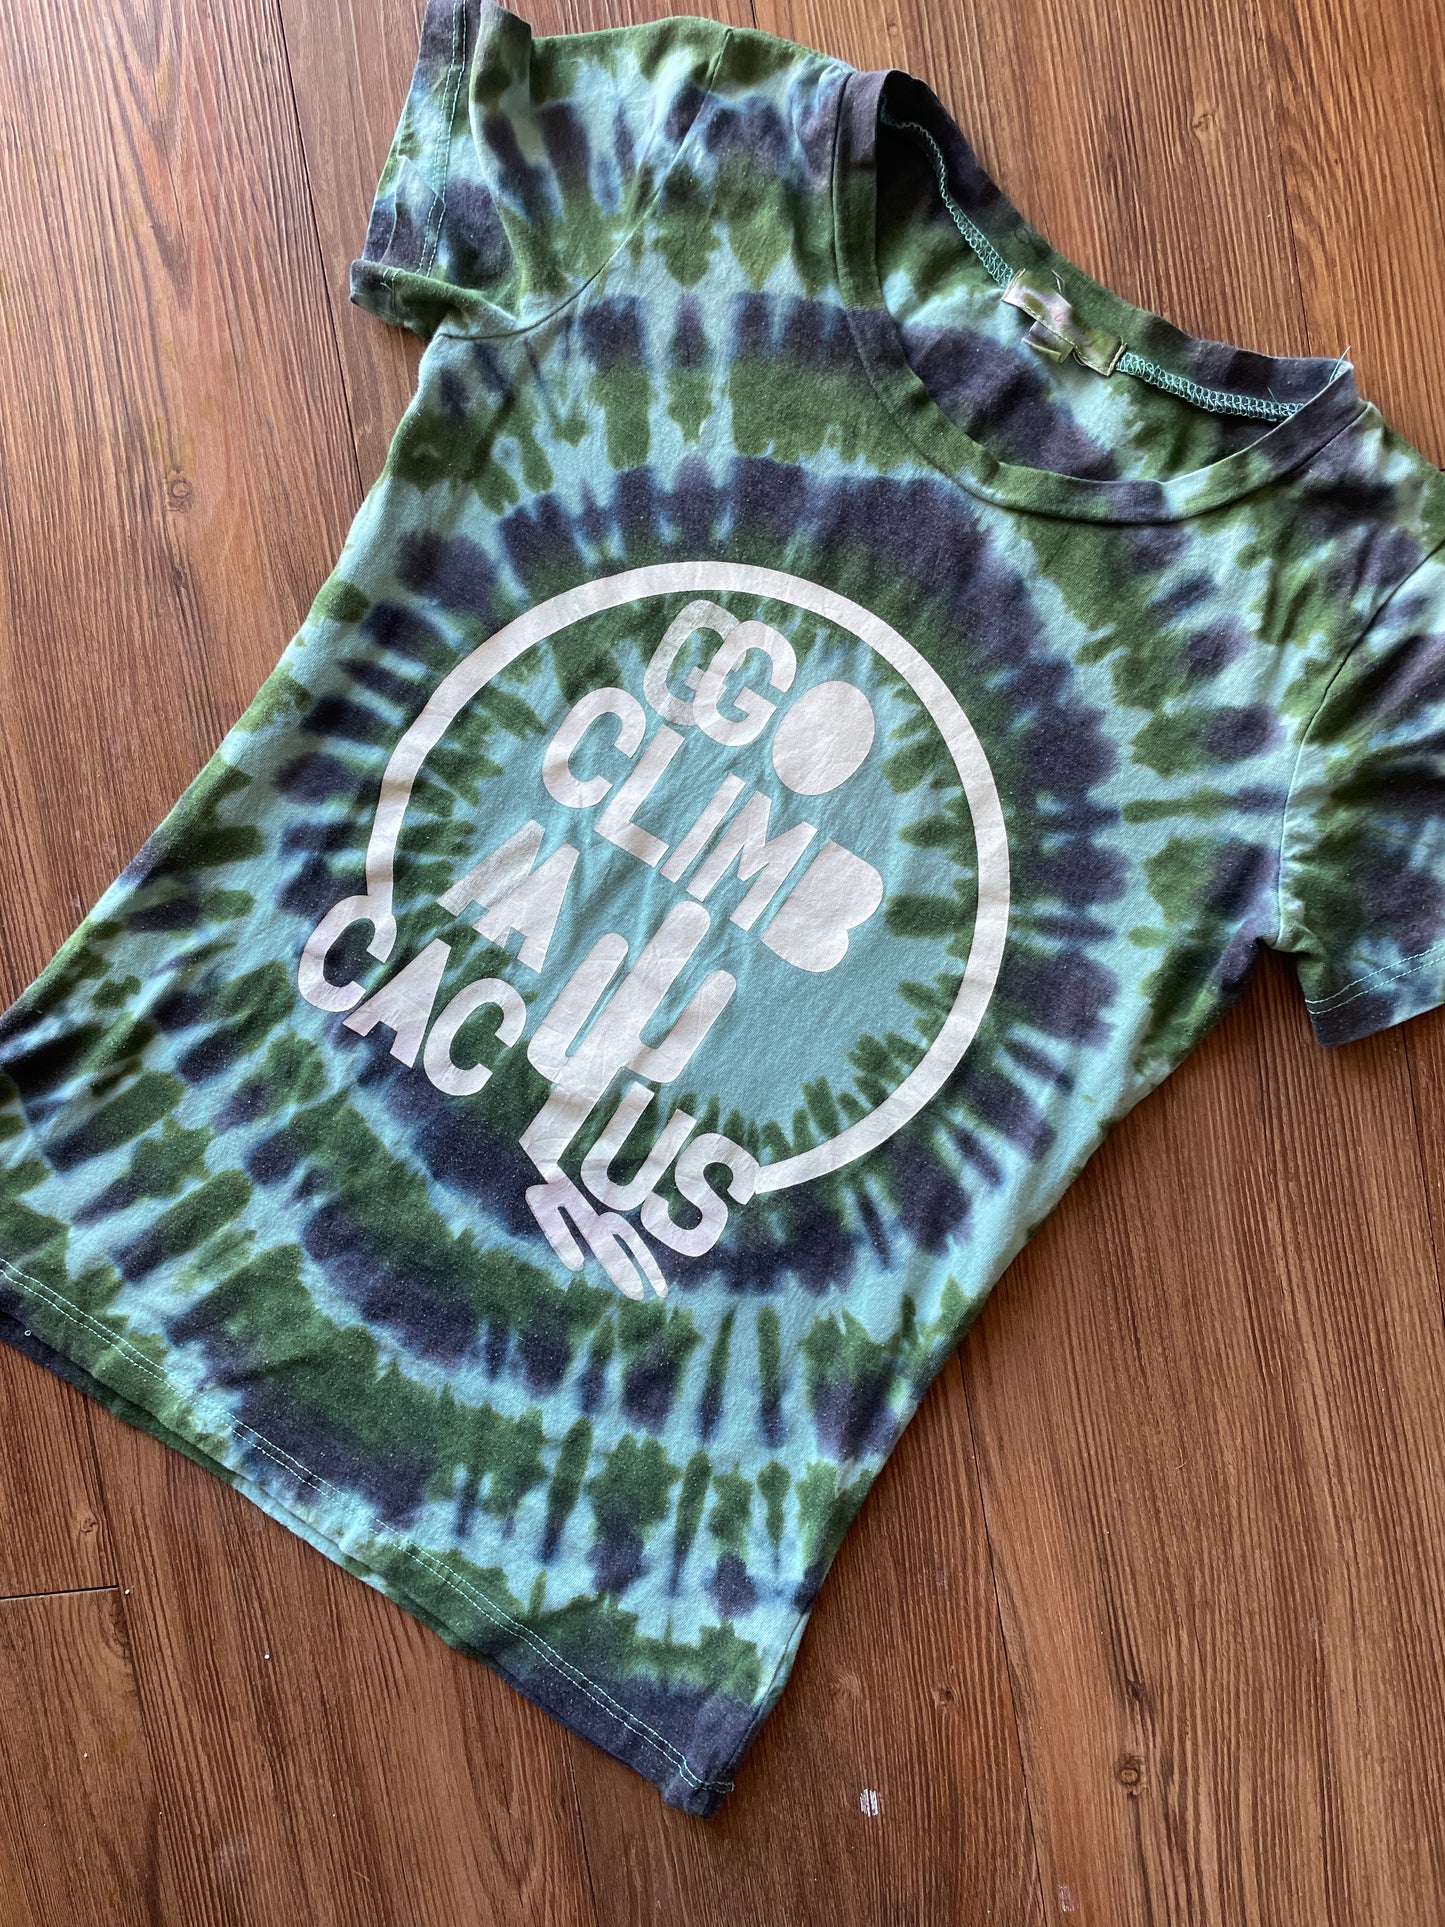 XS/S Women’s Go Climb a Cactus Handmade Tie Dye T-Shirt | One-Of-a-Kind Blue and Green Short Sleeve